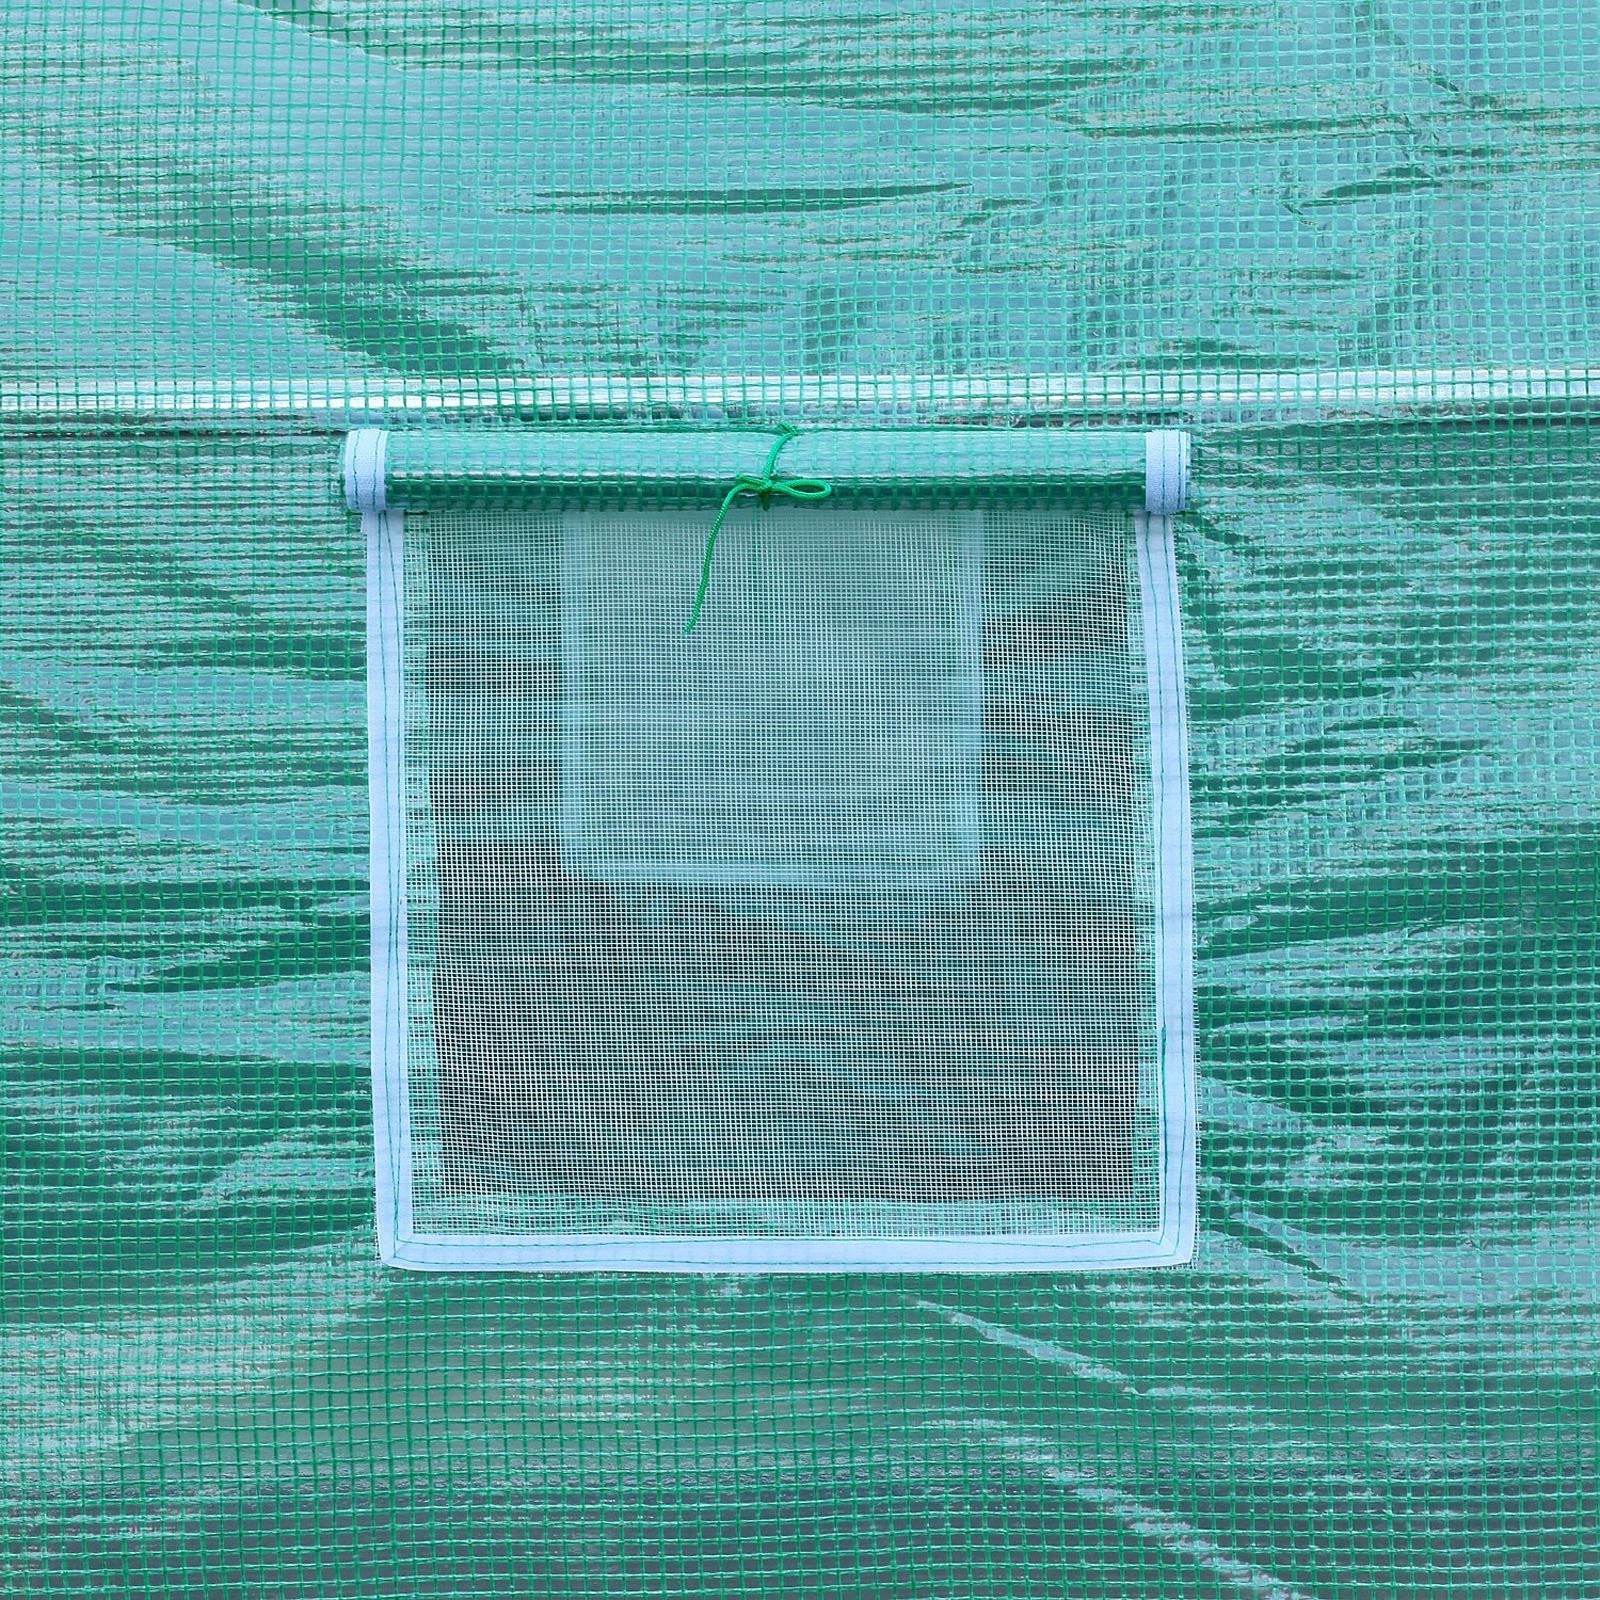 Outsunny 26' x 10' x 6.5' Large Outdoor Heavy Duty Walk-In Greenhouse with 12 Windows & Netted Ventilation Screens, White - image 4 of 7